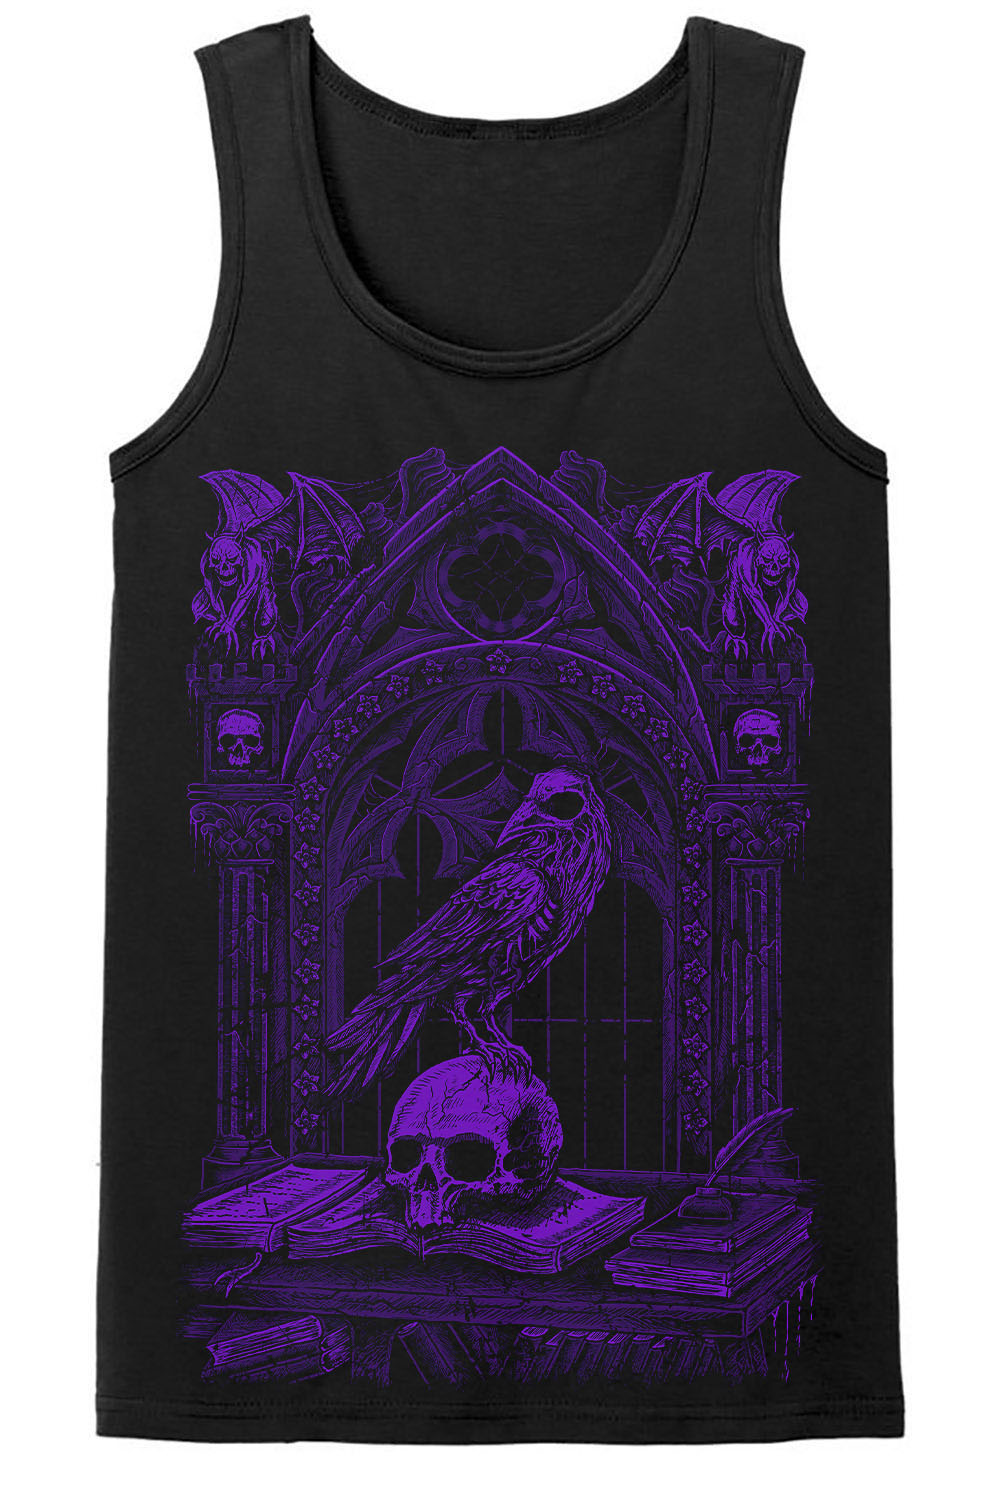 Quoth the Raven Tee [PURPLE] [Multiple Styles Available]